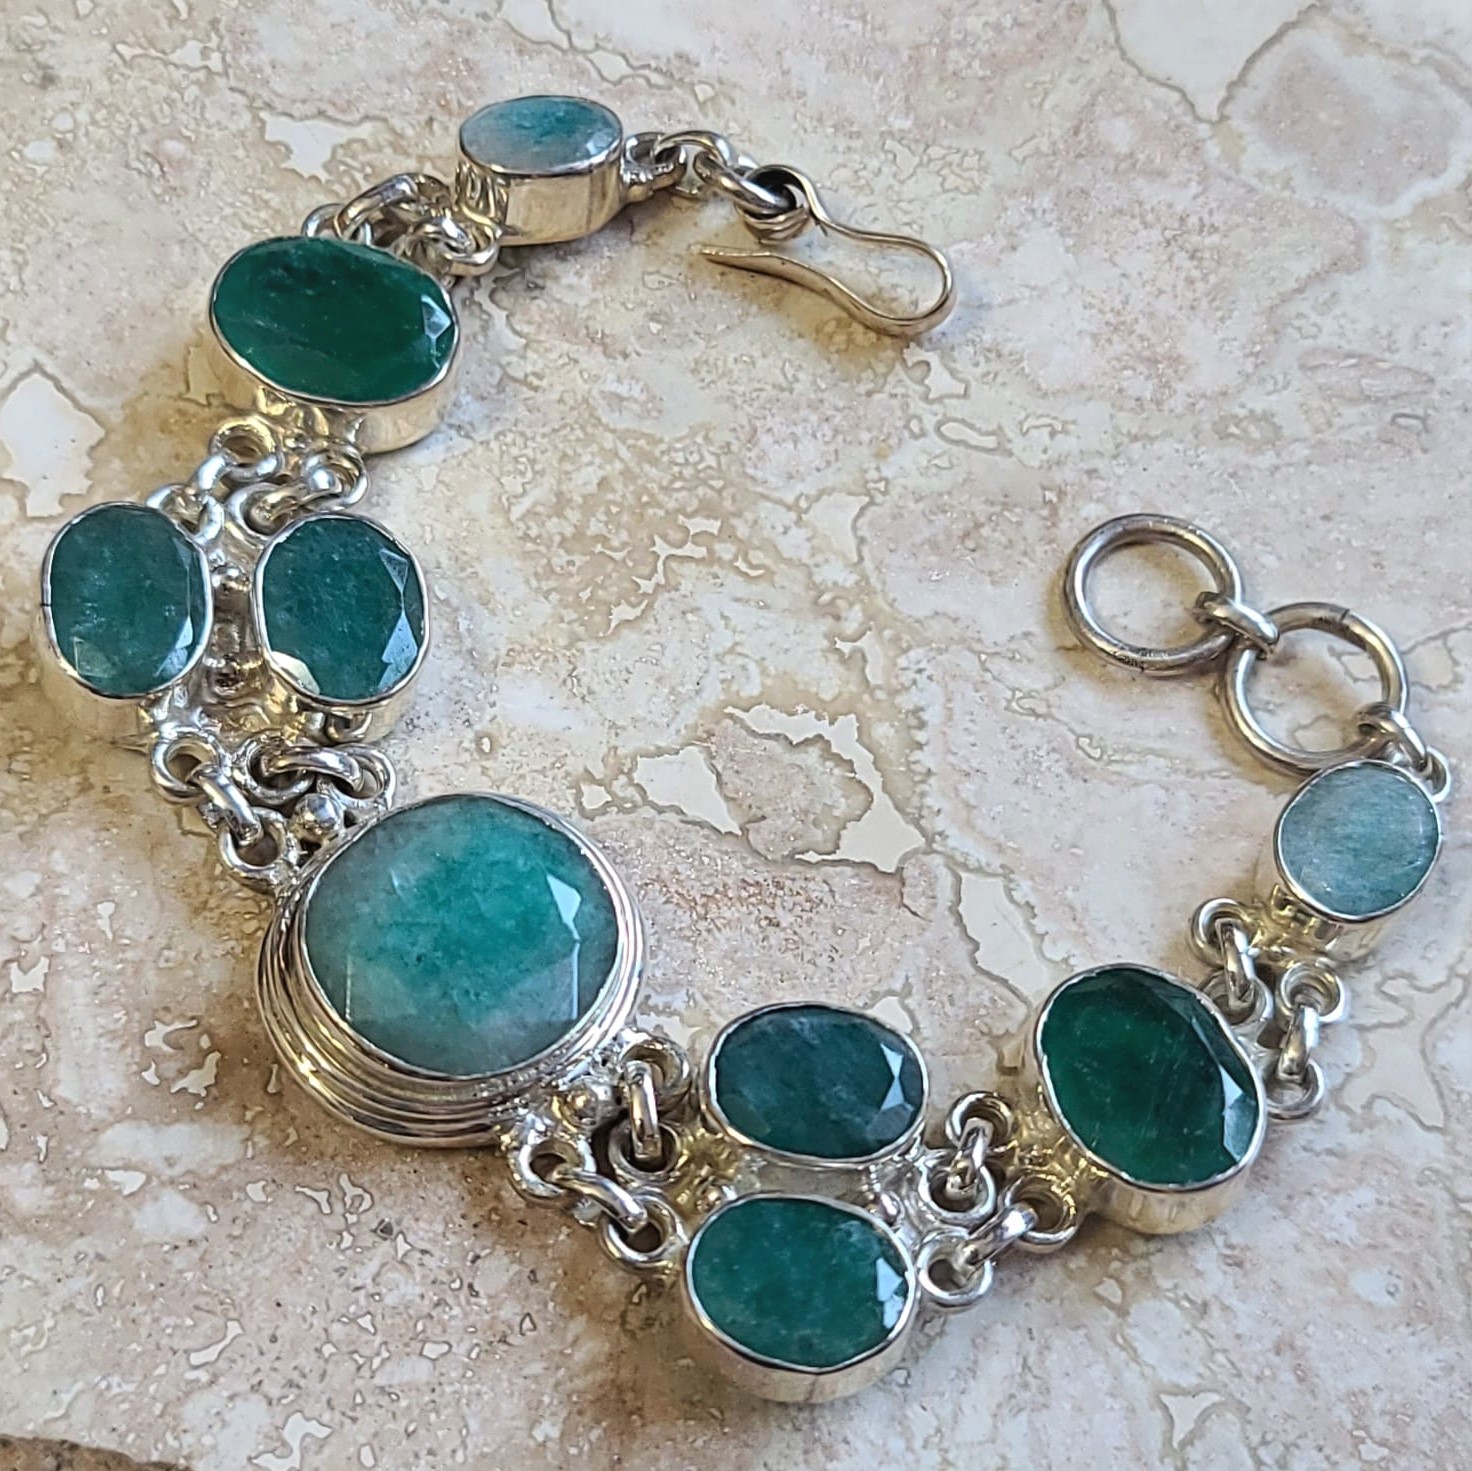 Emeralds 180 Carats Set in 925 Sterling Silver Bracelet - Click Image to Close